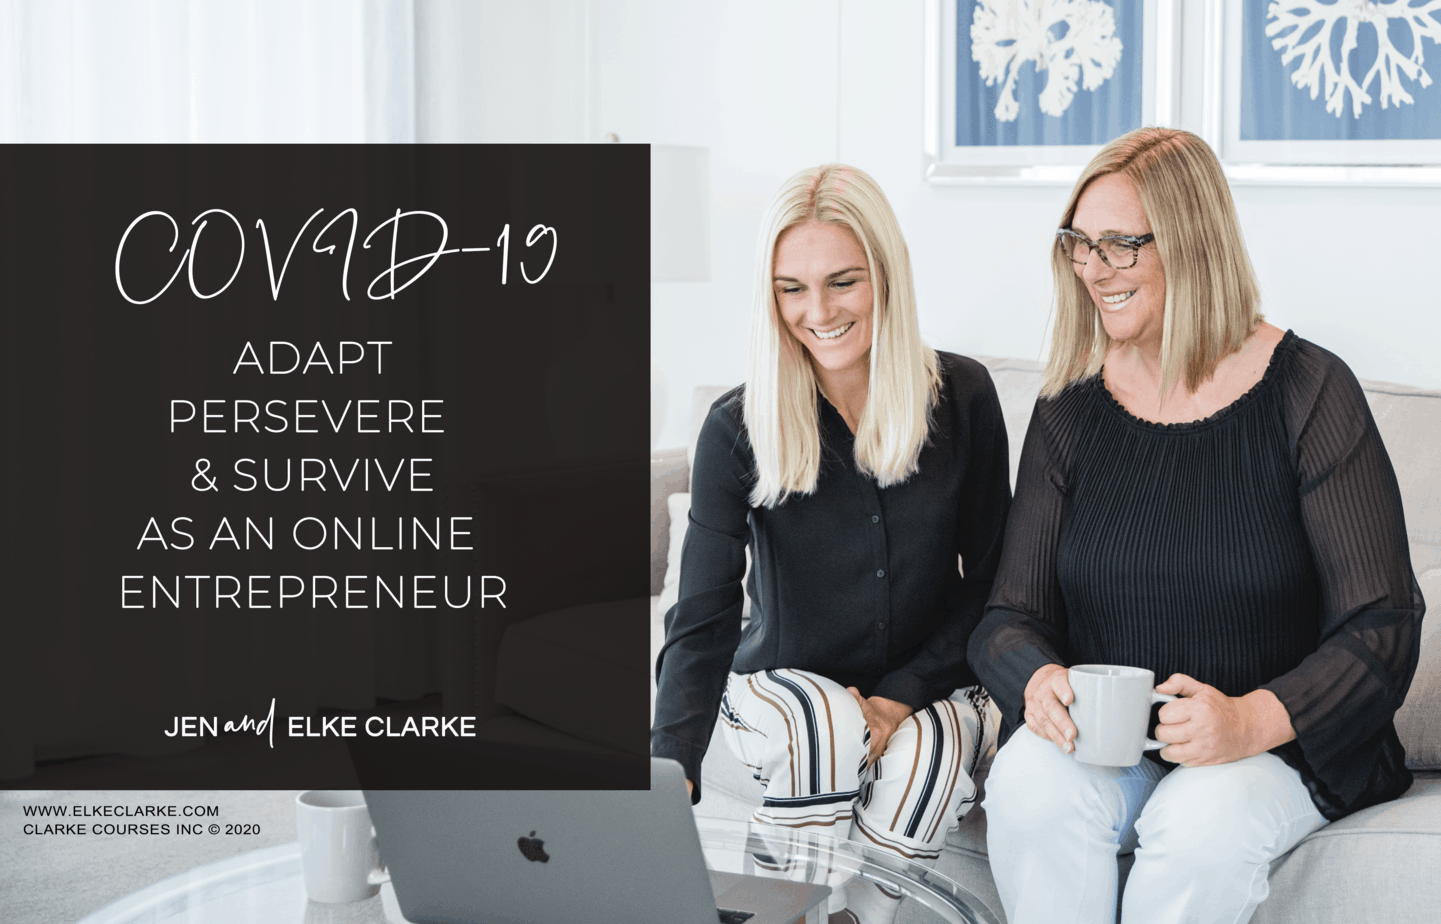 COVID-19 Adapt Persevere and Survive as an Online Entrepreneur with Jen and Elke Clarke